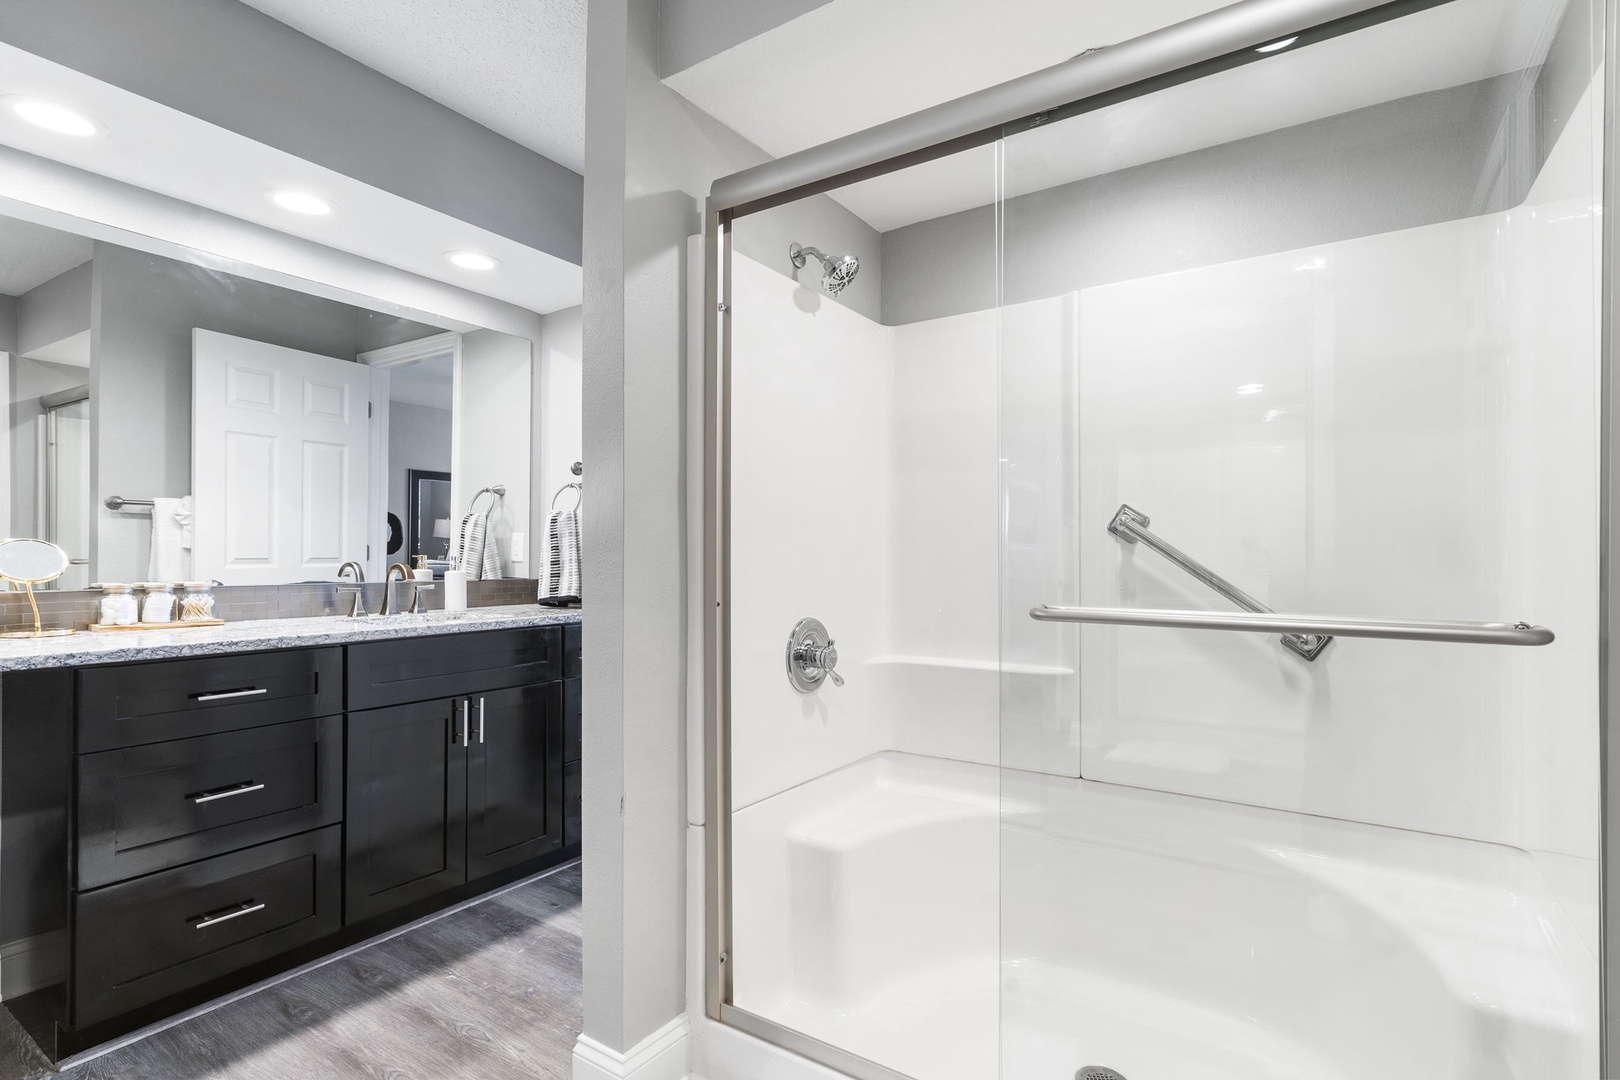 Unit 20: The second ensuite includes an oversized vanity & walk-in shower